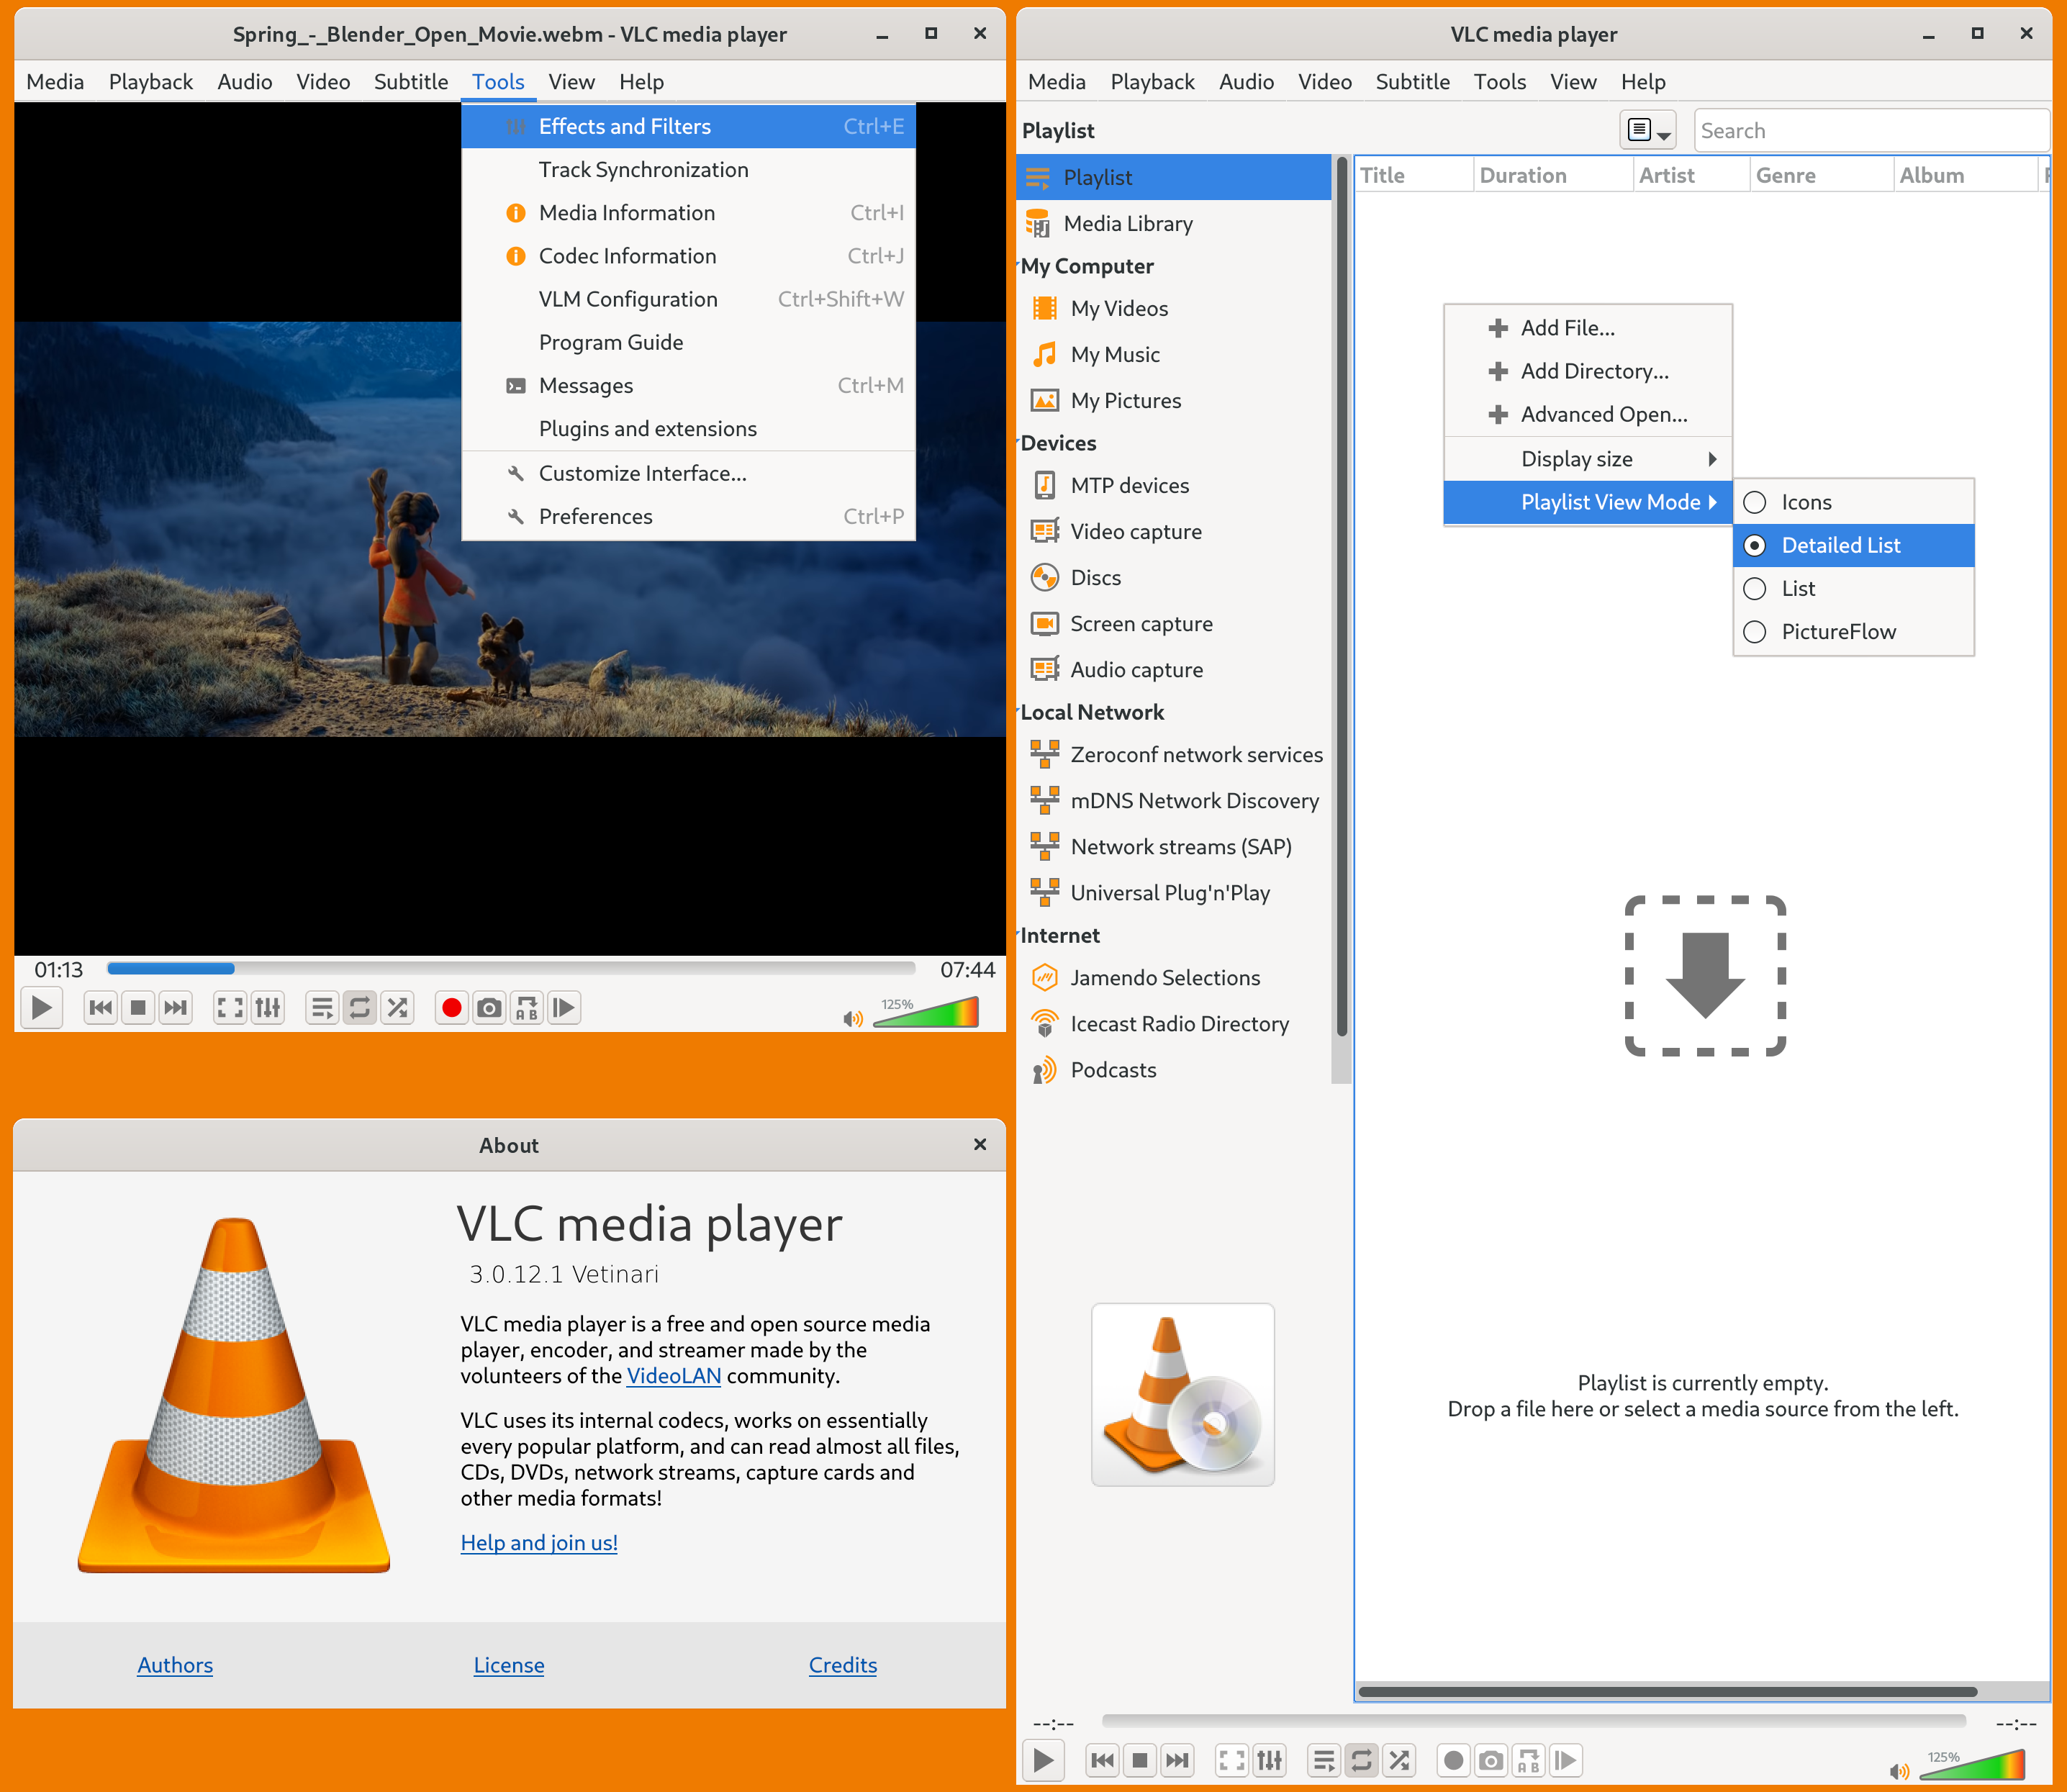 vlc media player 3.0.12 %28released in 2021 01%29